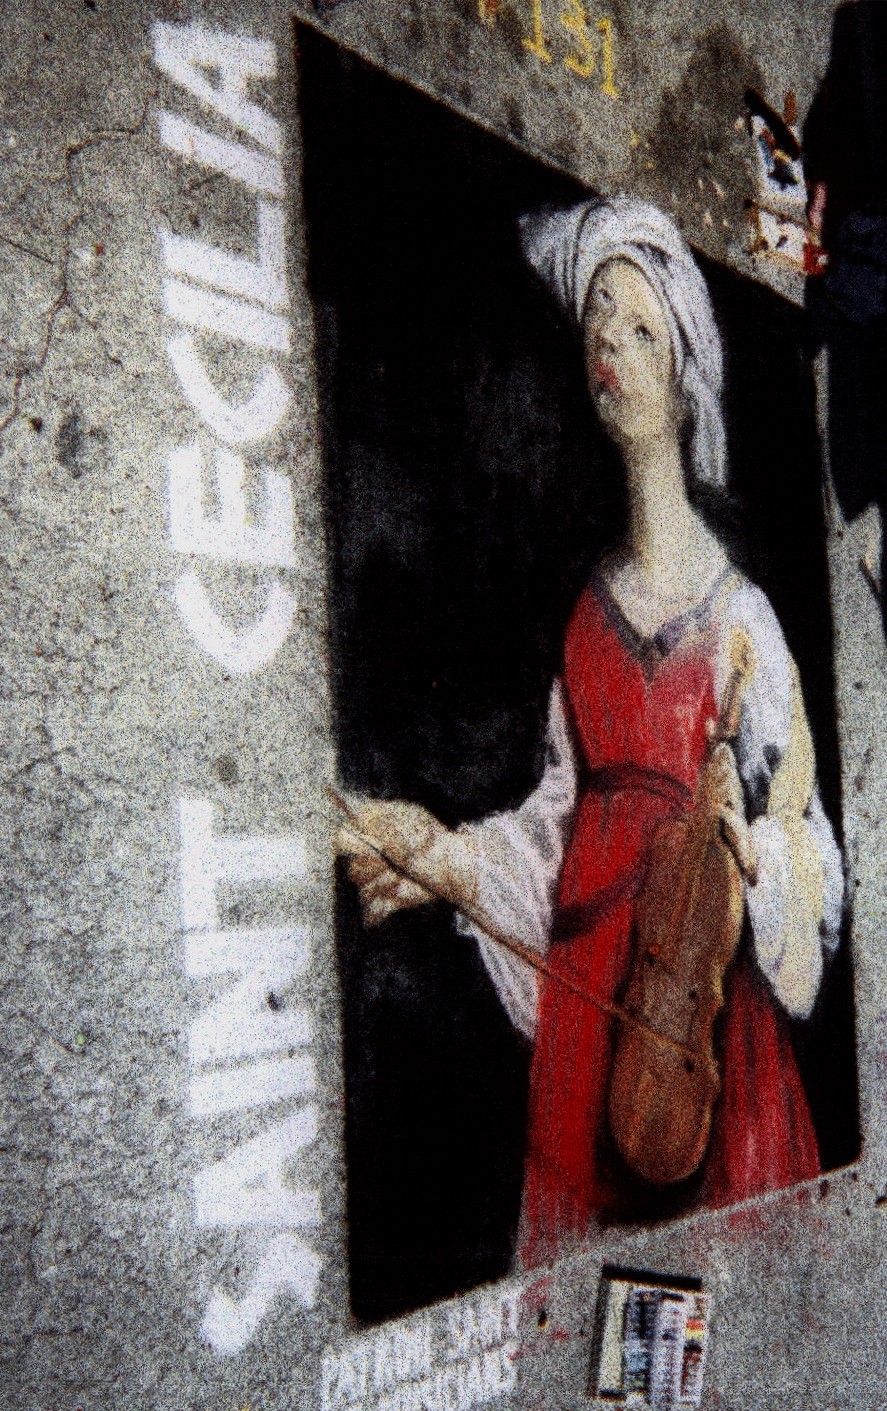 Chalk Painting of Saint Cecilia, Patron of Music and Musicians